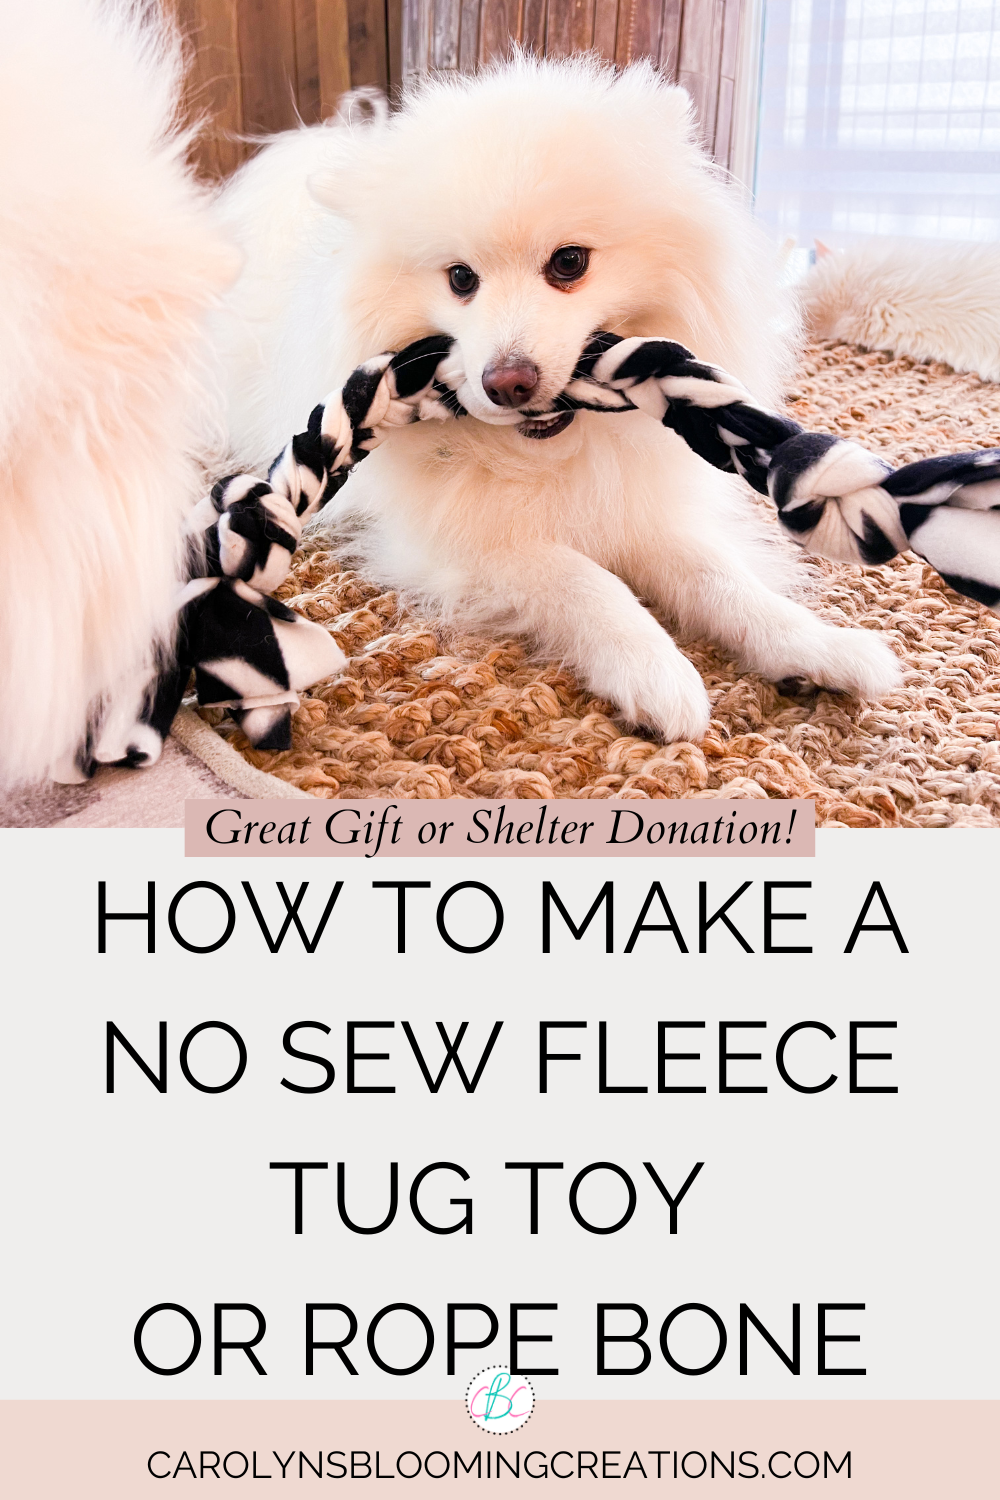 How To Make A No Sew Fleece Tug Toy Or